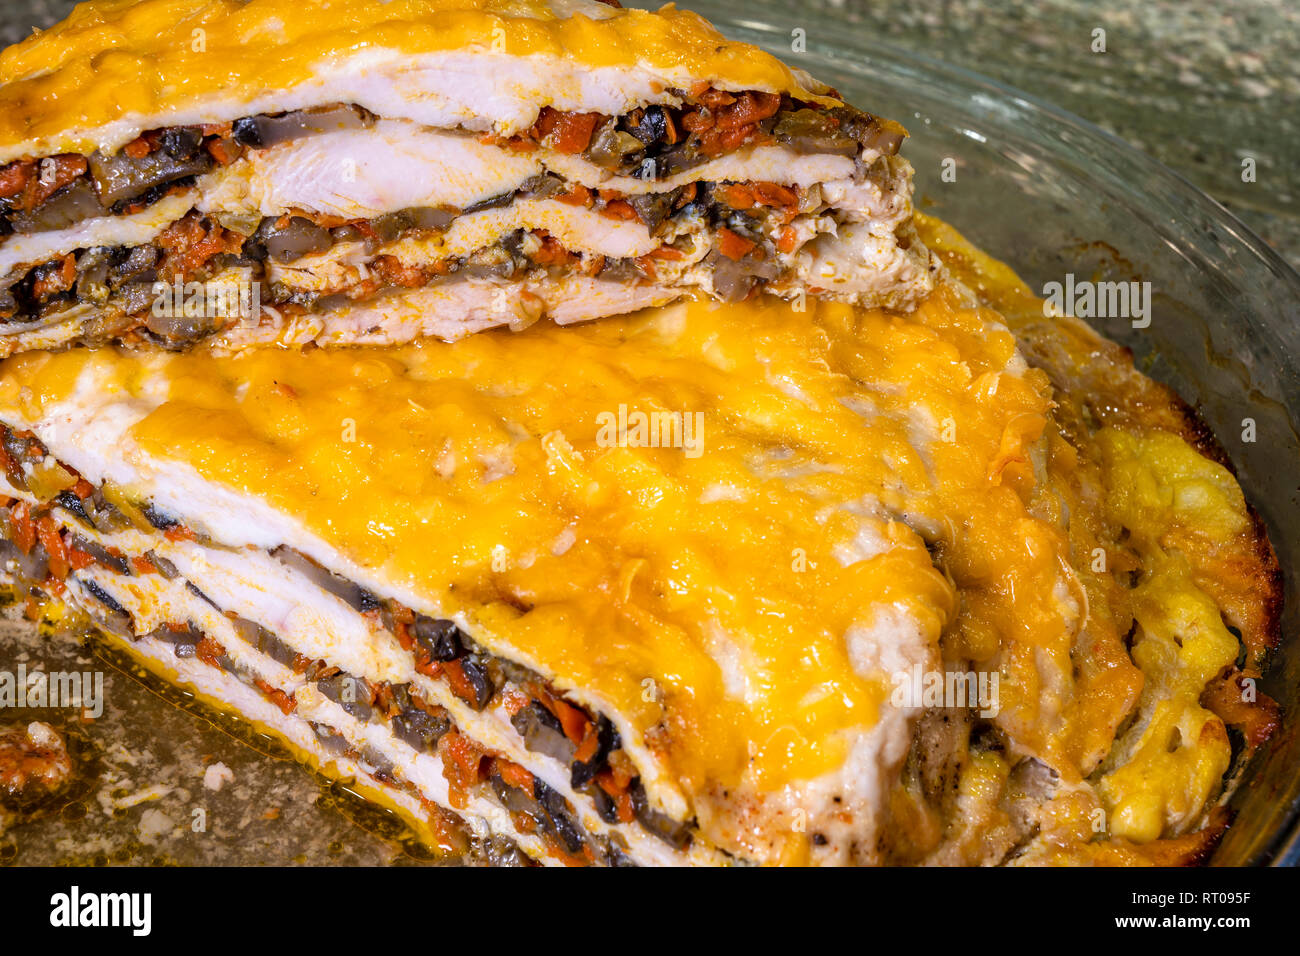 Baked in a glass baking tray in the oven, a layered meat pie with mushrooms and vegetables, covered with melted cheese, ready to eat, cut into pieces  Stock Photo